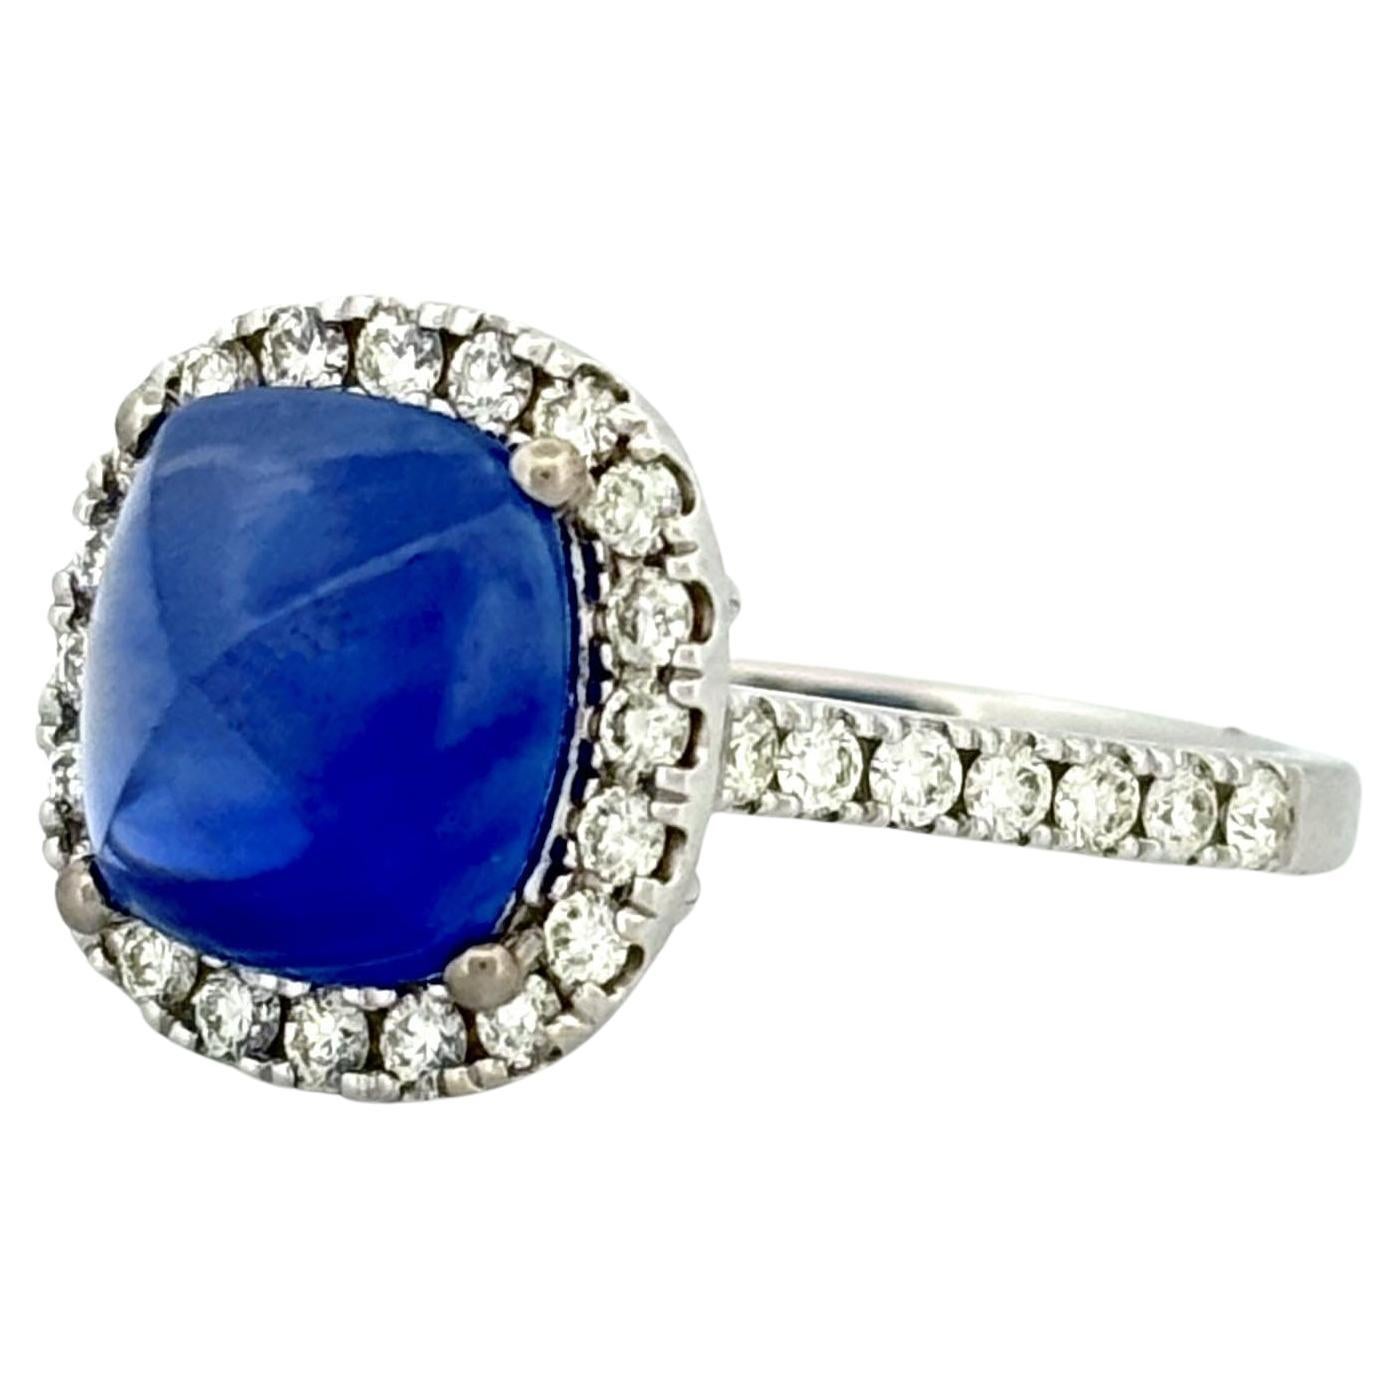 4.23 Carat Sugarloaf Ceylon Sapphire Ring with Halo Diamonds in 14K White Gold For Sale